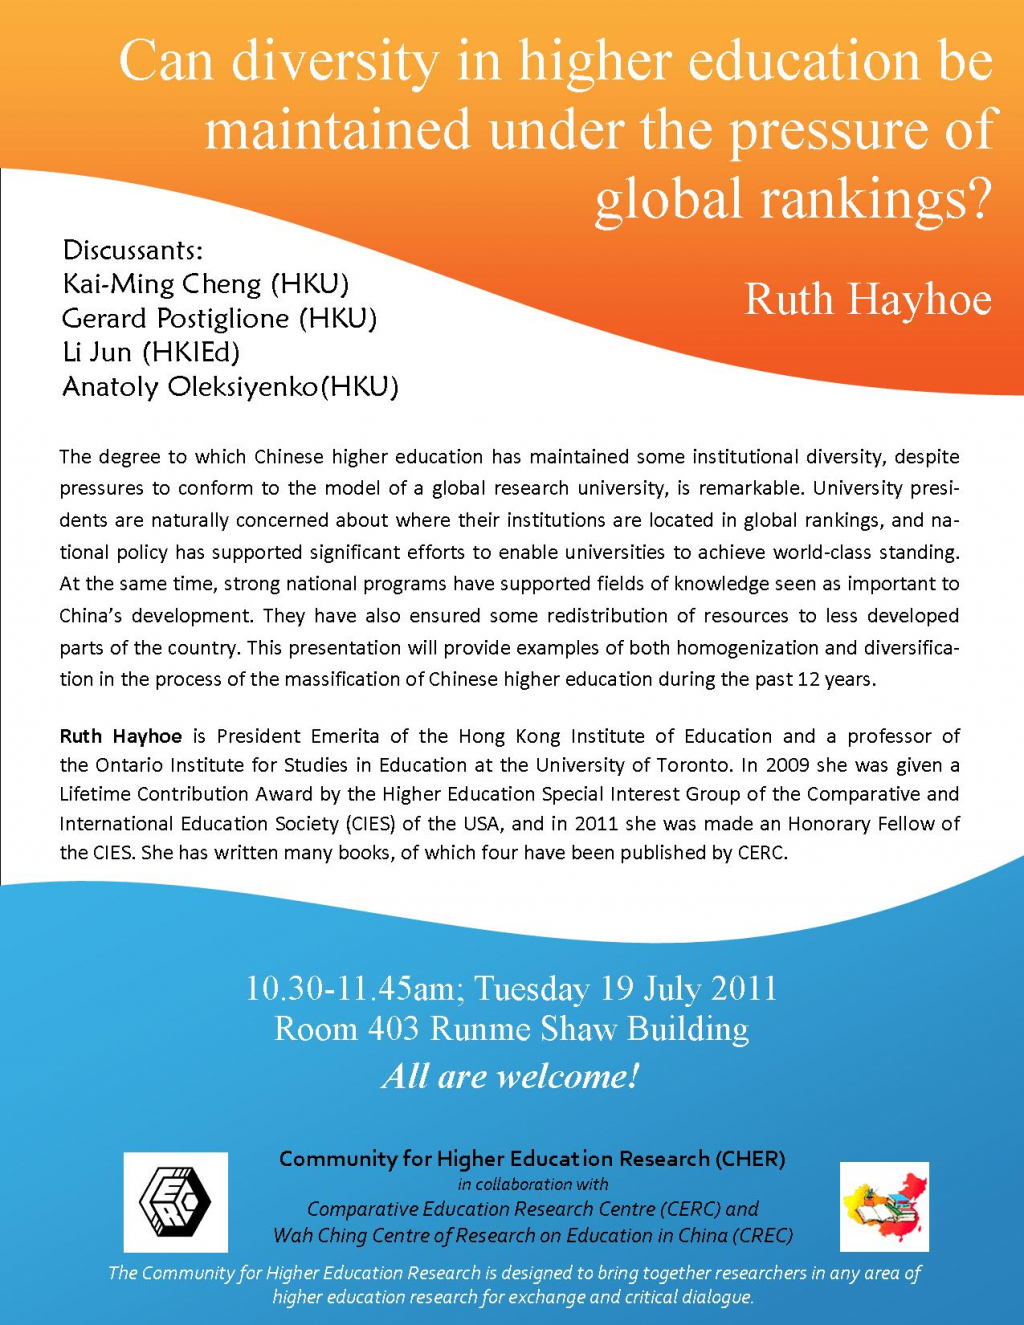 Can diversity in higher education be maintained under the pressure of global ranking systems?